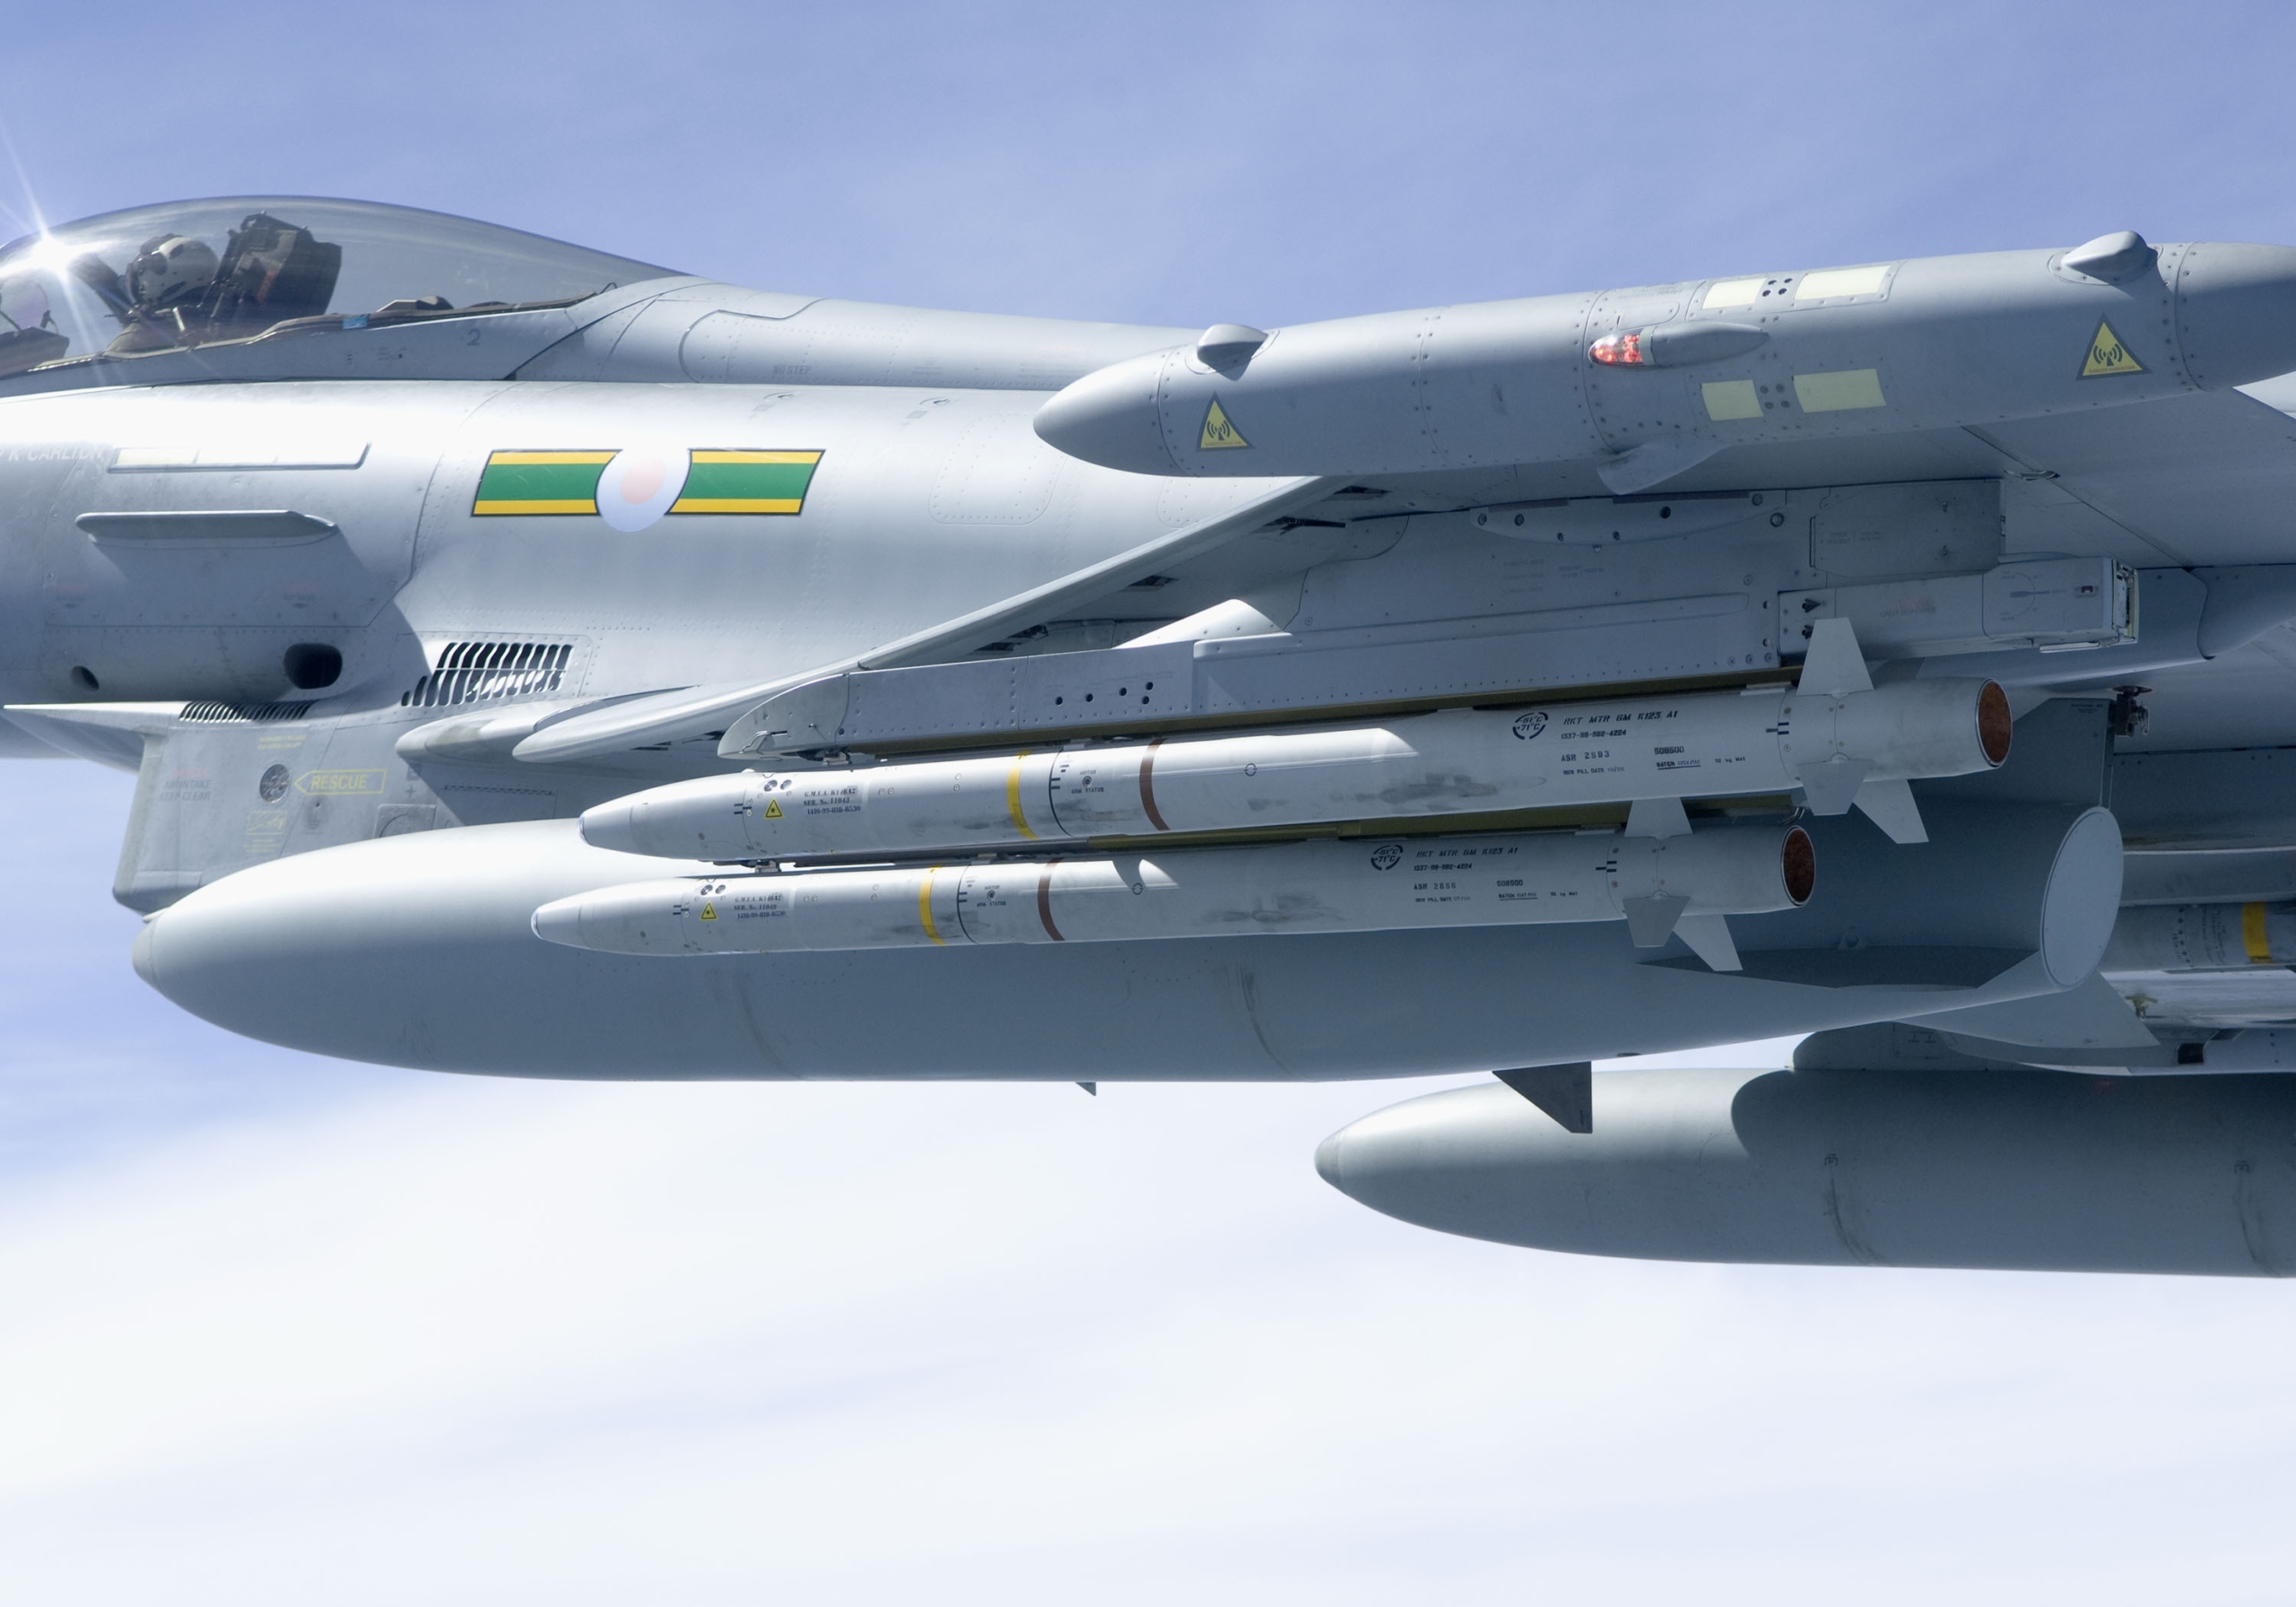 ASRAAM Missiles Fitted to RAF Typhoon Jet